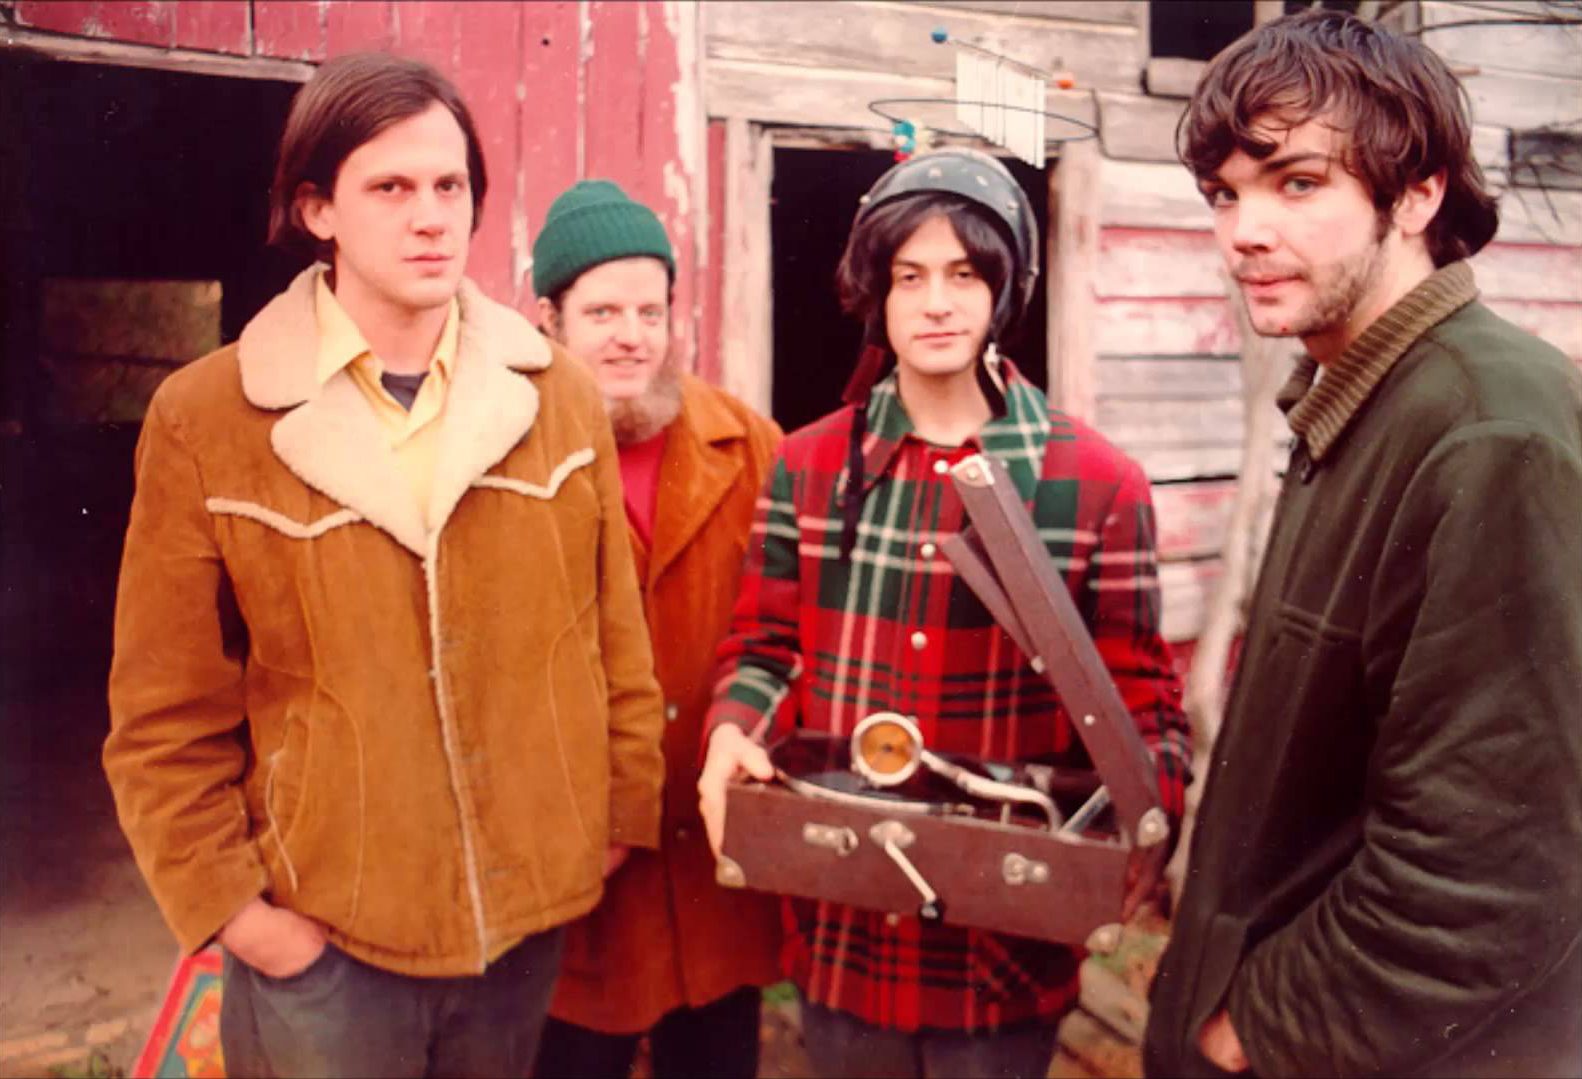 A Look Back: Neutral Milk Hotel Full Halloween House Show From 1997